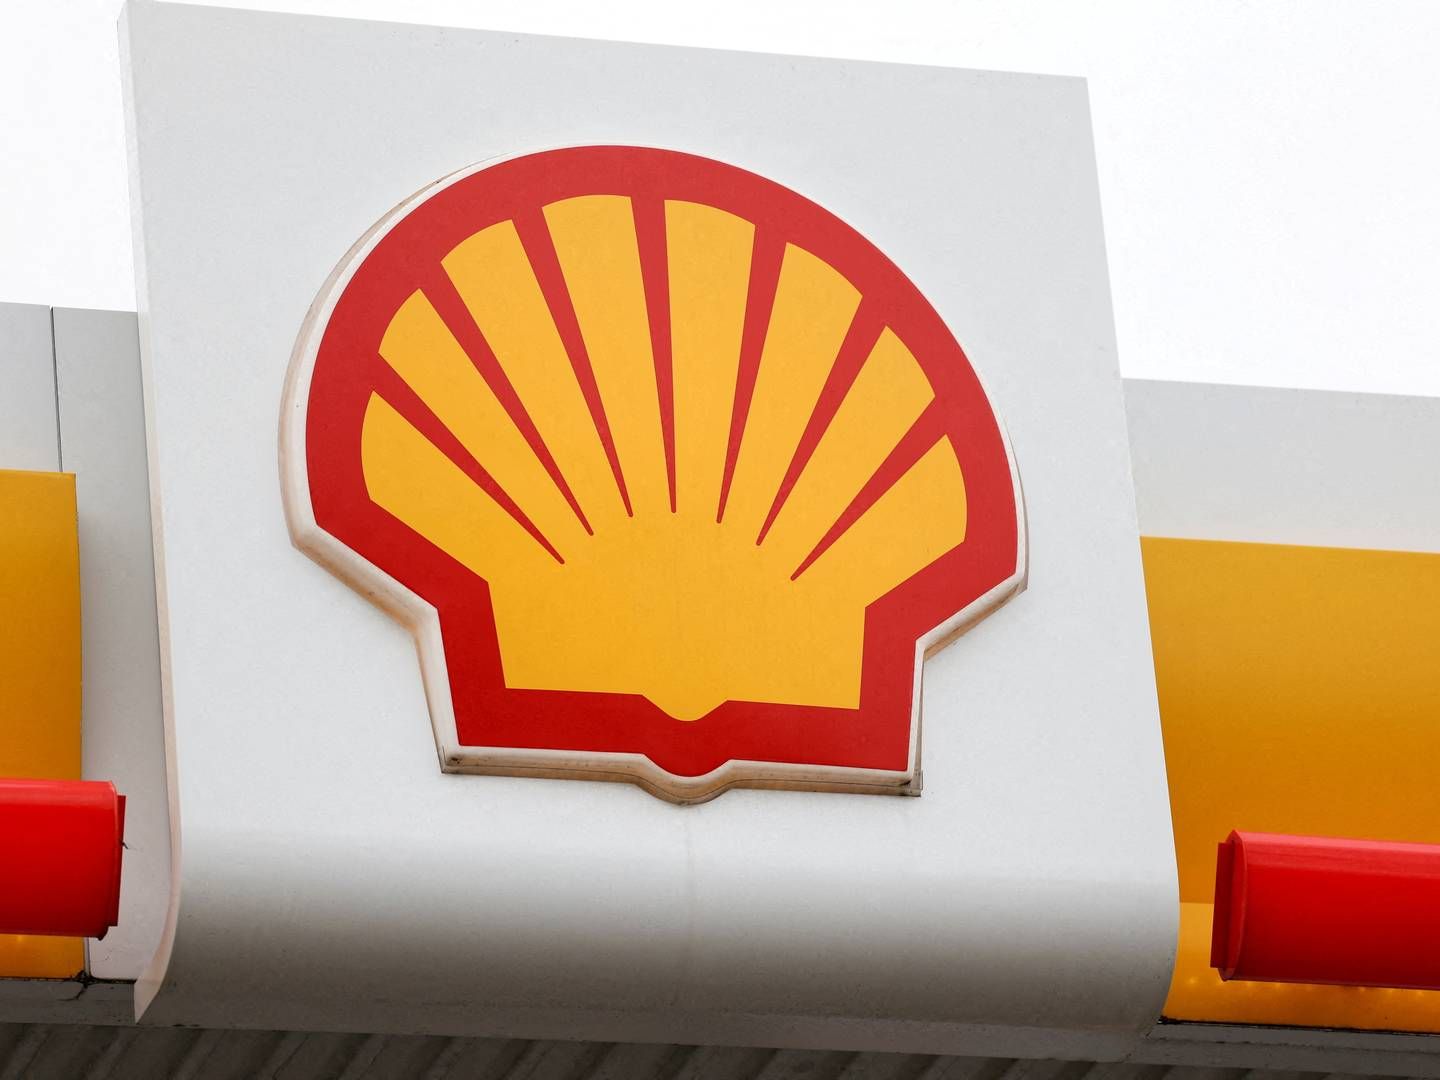 Shell will commence its annual general meeting today, Tuesday. | Photo: May James/Reuters/Ritzau Scanpix